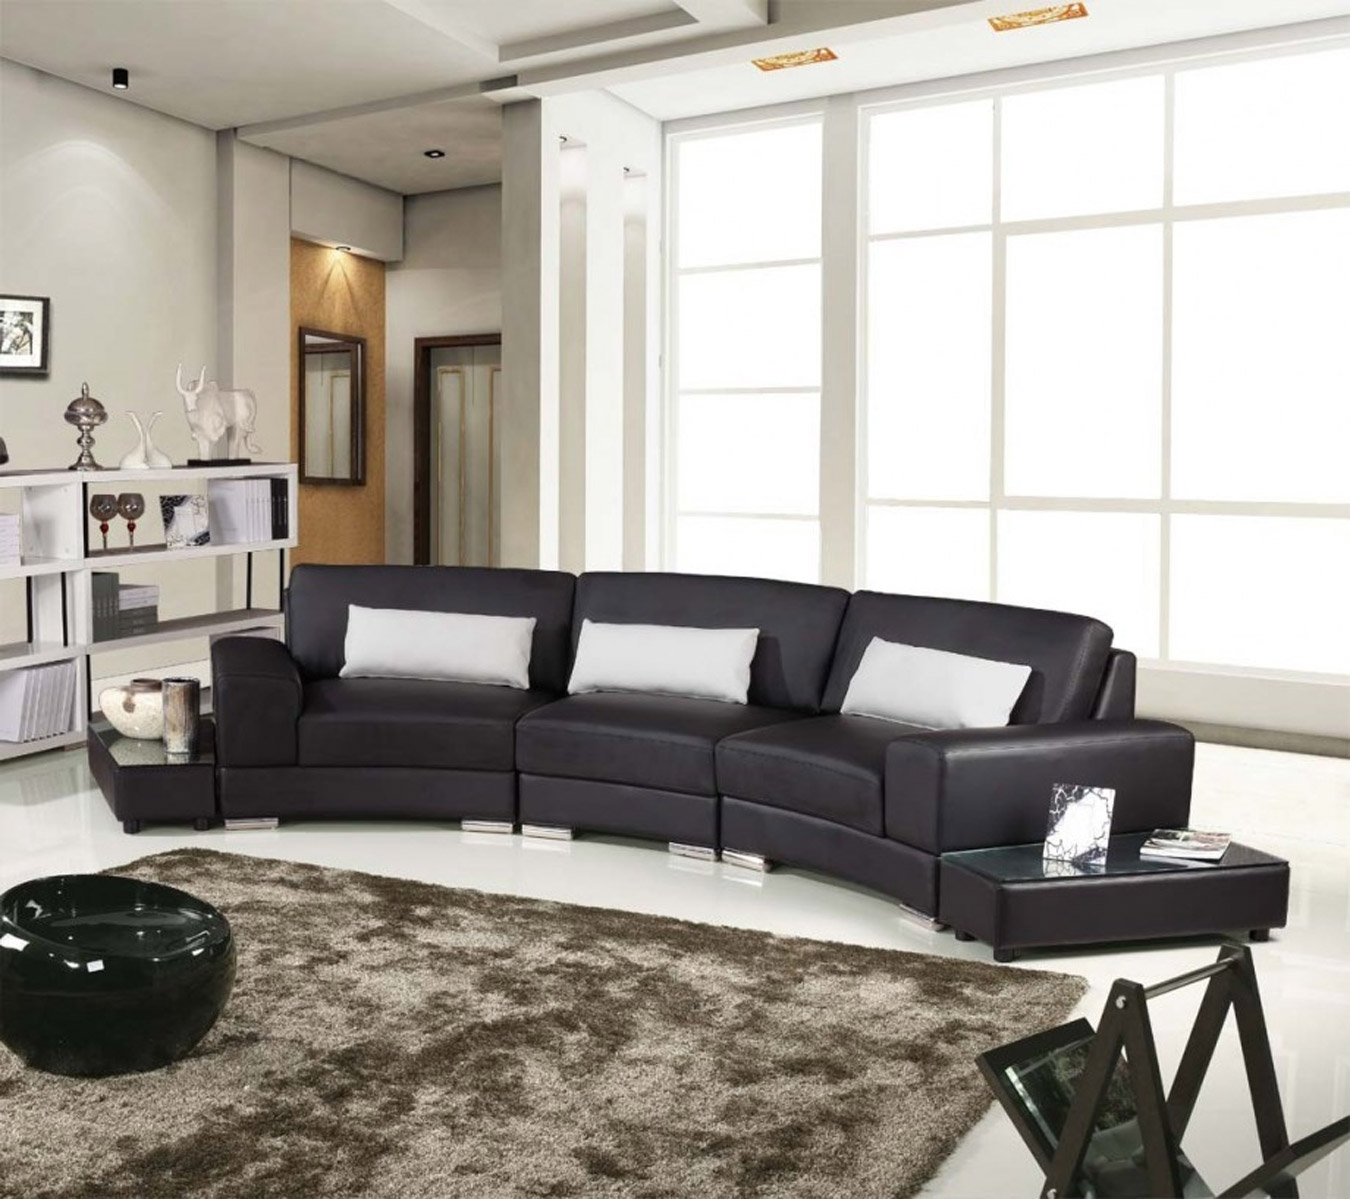 Living Room Studio Heavenly Living Room Furniture For Studio Apartments Design Ideas With Modern Black Leather Sofa Bed IKEA Also White Ceramic Floor Designs Plus Stunning Bookshelf Ideas Living Room Find Suitable Living Room Furniture With Your Style